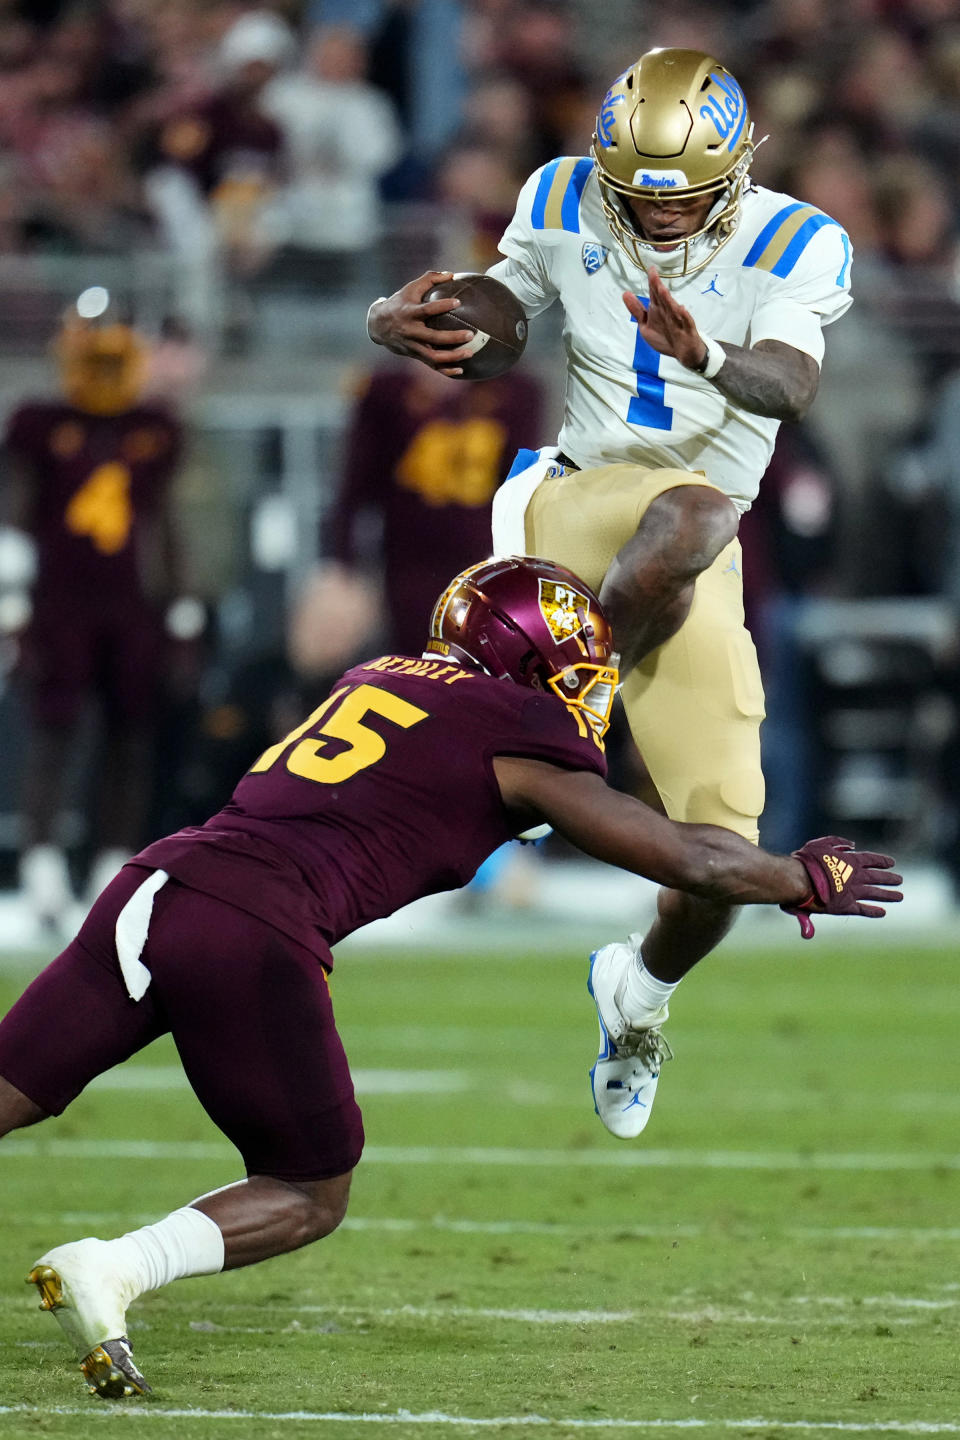 UCLA quarterback Dorian Thompson-Robinson (1) leaps over Arizona State defensive back Khoury Bethley (15) during the first half of an NCAA college football game in Tempe, Ariz., Saturday, Nov. 5, 2022. (AP Photo/Ross D. Franklin)